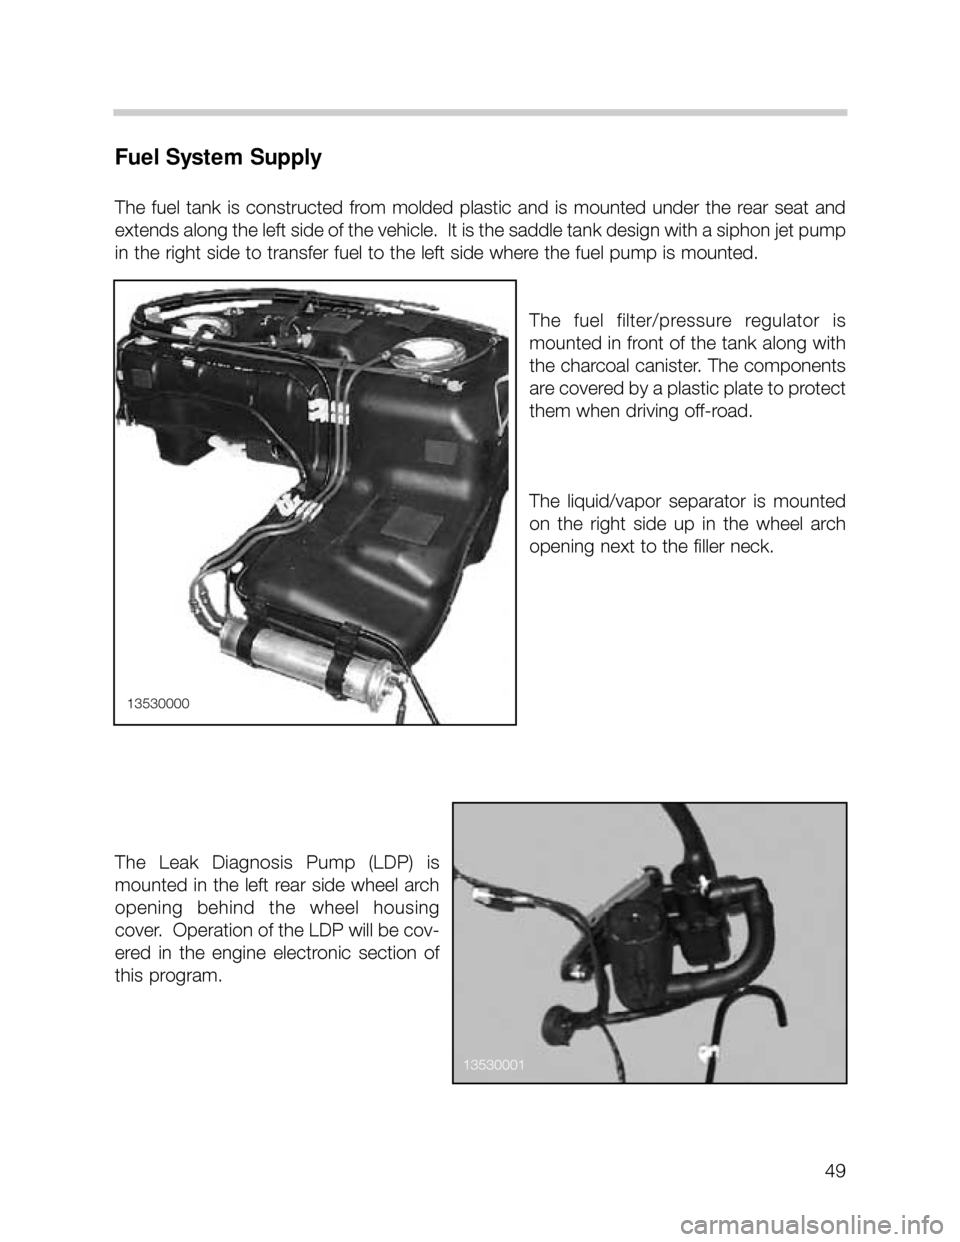 BMW X5 2004 E53 Service Manual 49
Fuel System Supply
The  fuel  tank  is  constructed  from  molded  plastic  and  is  mounted  under  the  rear  seat  and
extends along the left side of the vehicle.  It is the saddle tank design w